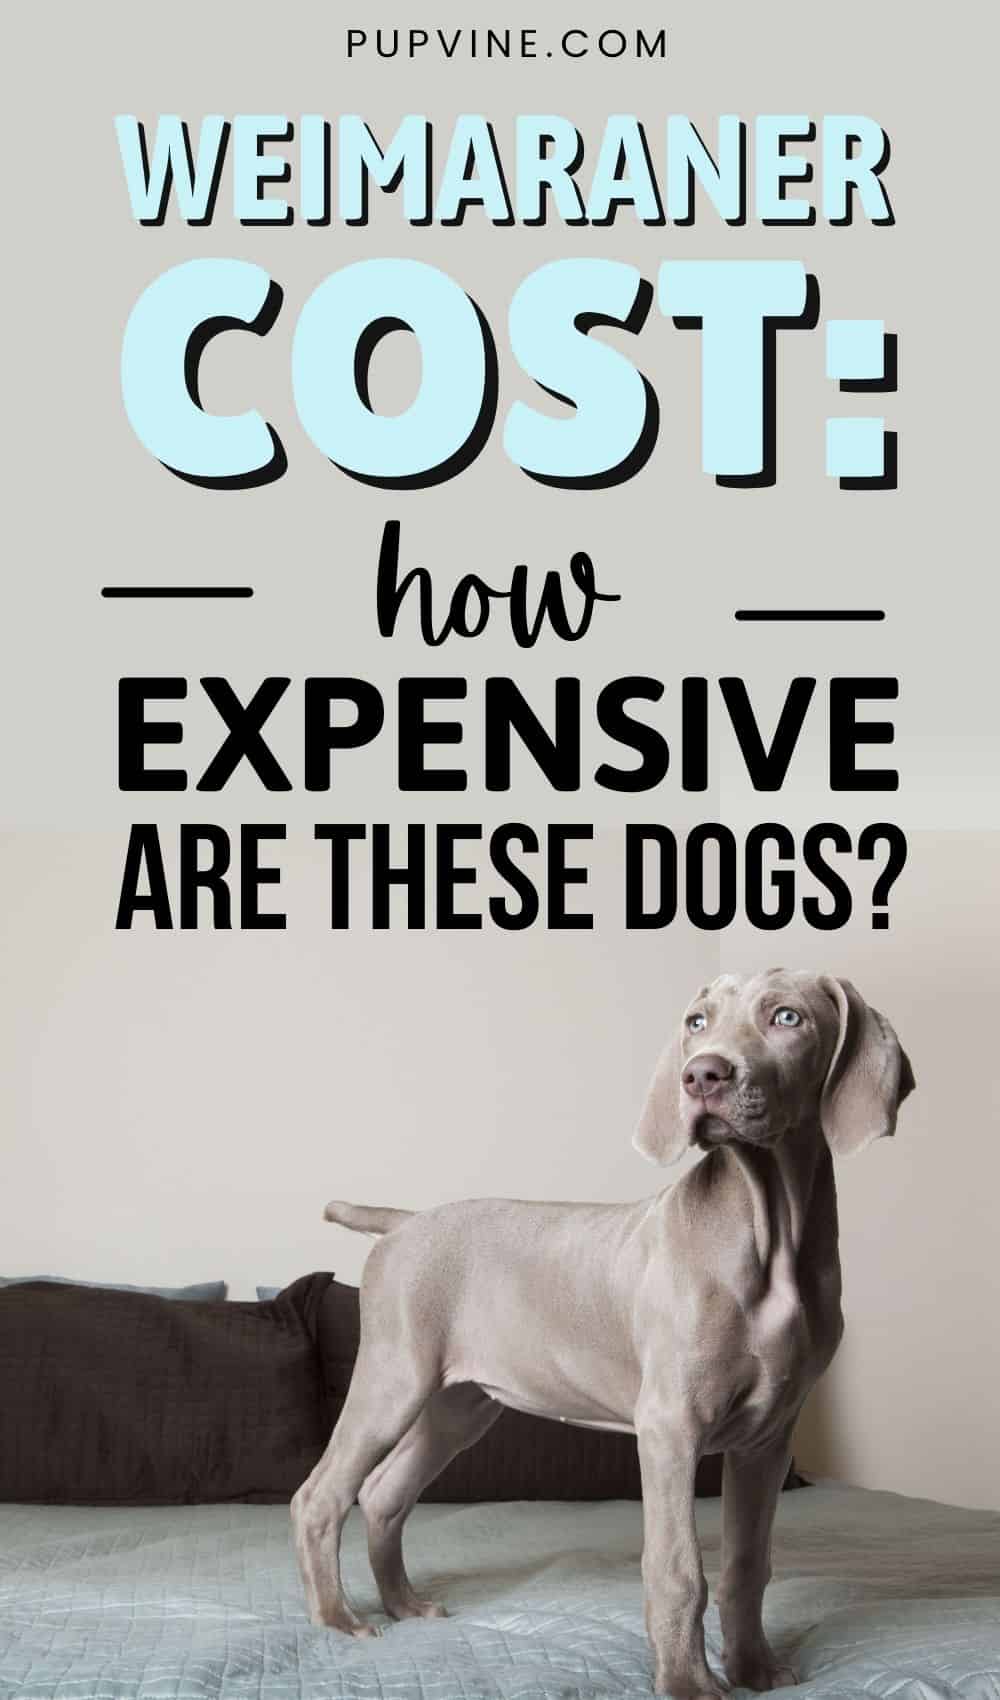 Weimaraner Cost: How Expensive Are These Dogs?